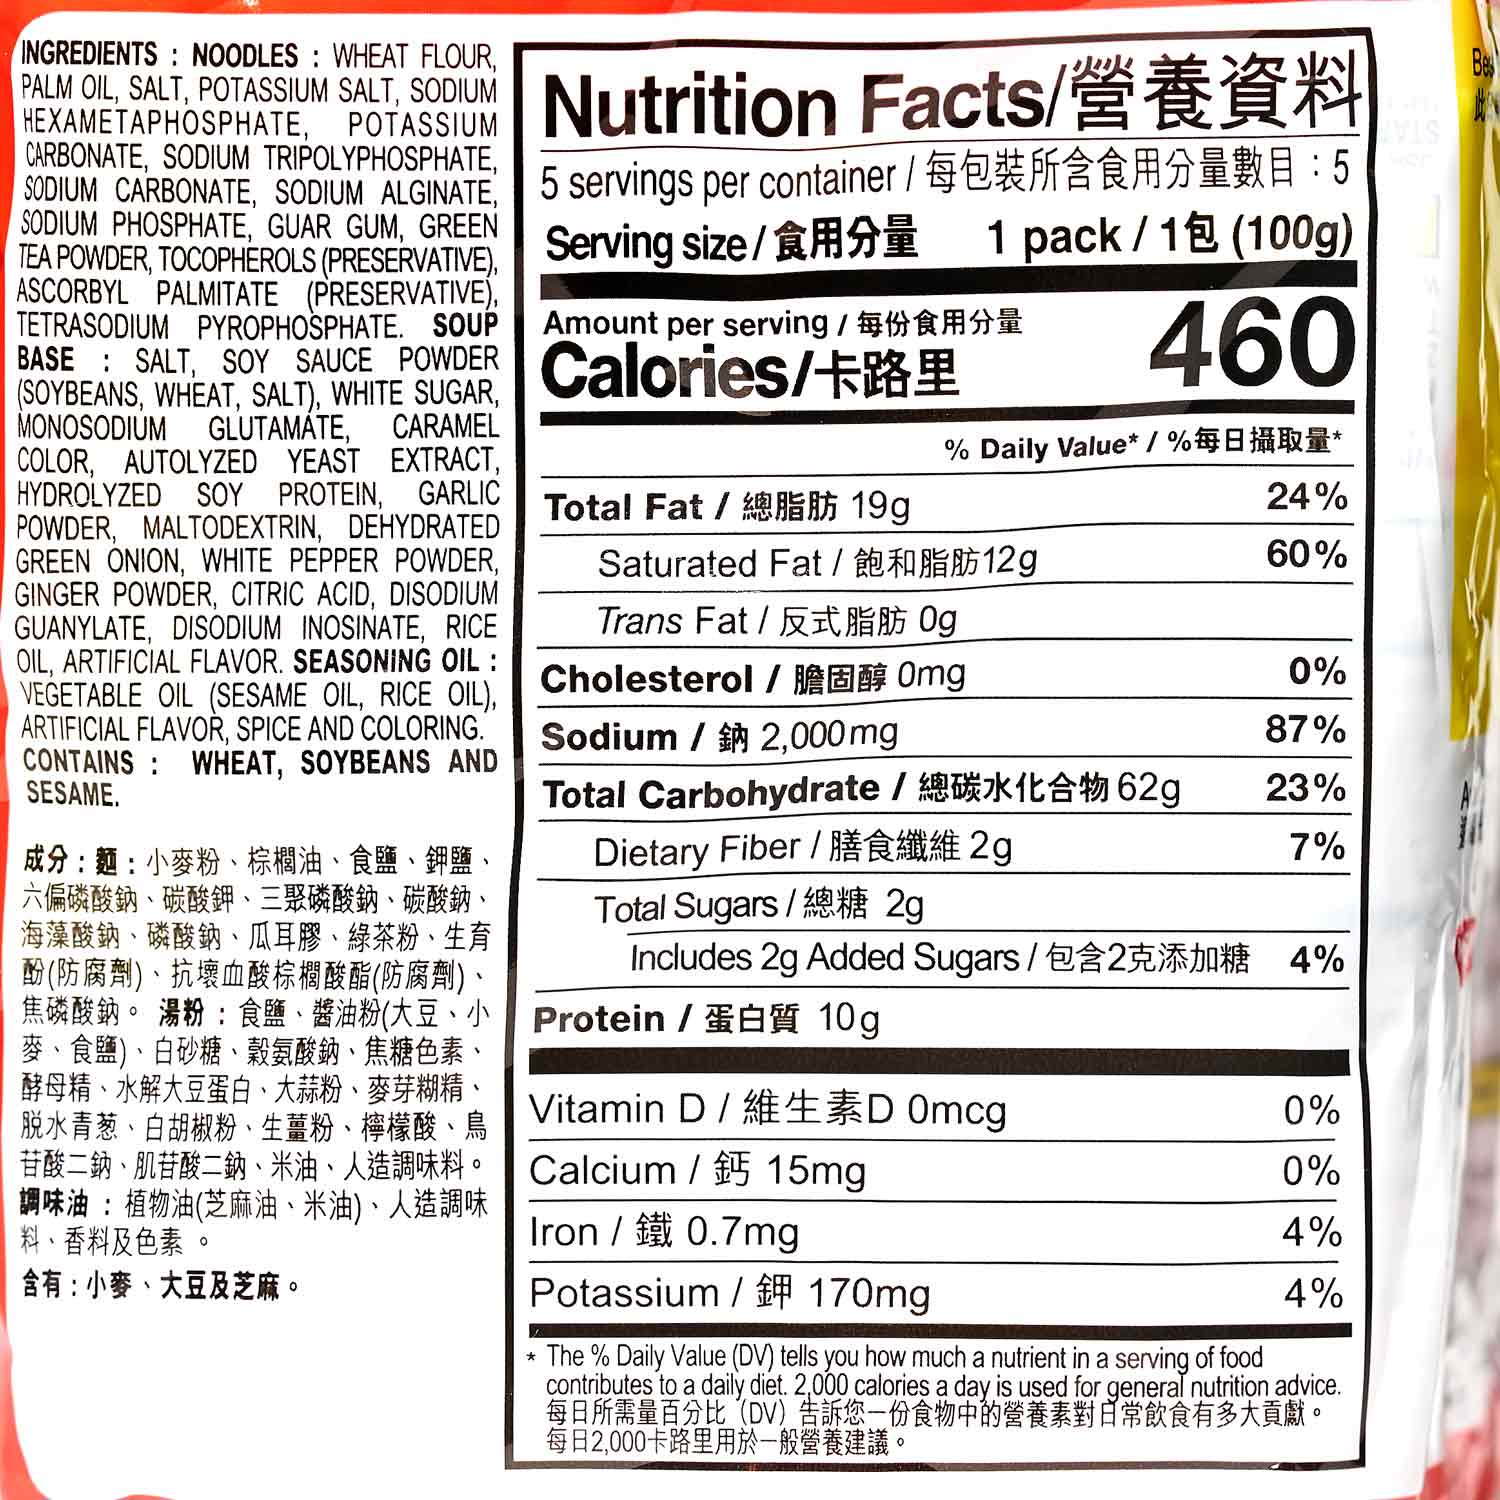 Nissin Chicken Flavour Noodles 100g - Asian Pantry